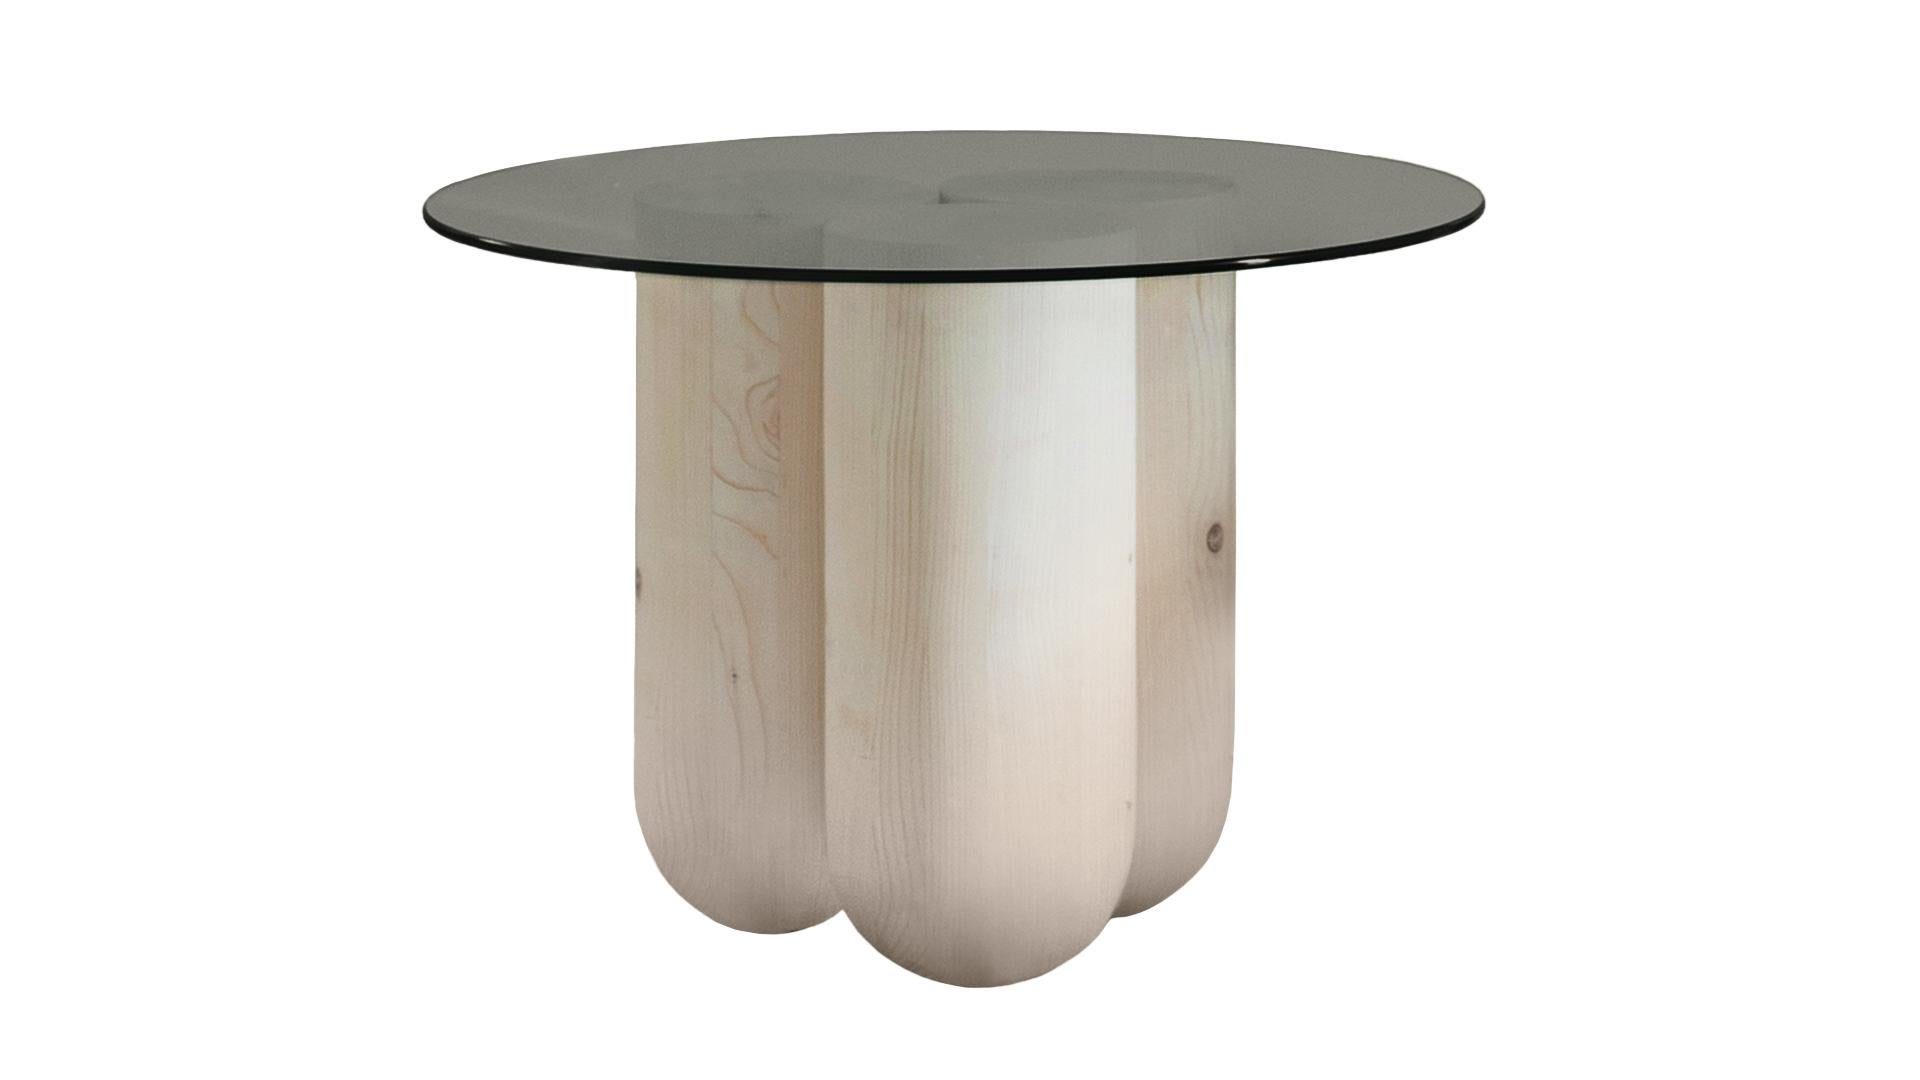 Mia Side Table by LI-AN-LO Studio
Dimensions: ø 70 x 50 cm.
Materials: Spruce and bronze tempered glass.

Clear or bronze coloured glass top options available. Please contact us.

MIA is a side table with a playfully soft shape. The base, which is a